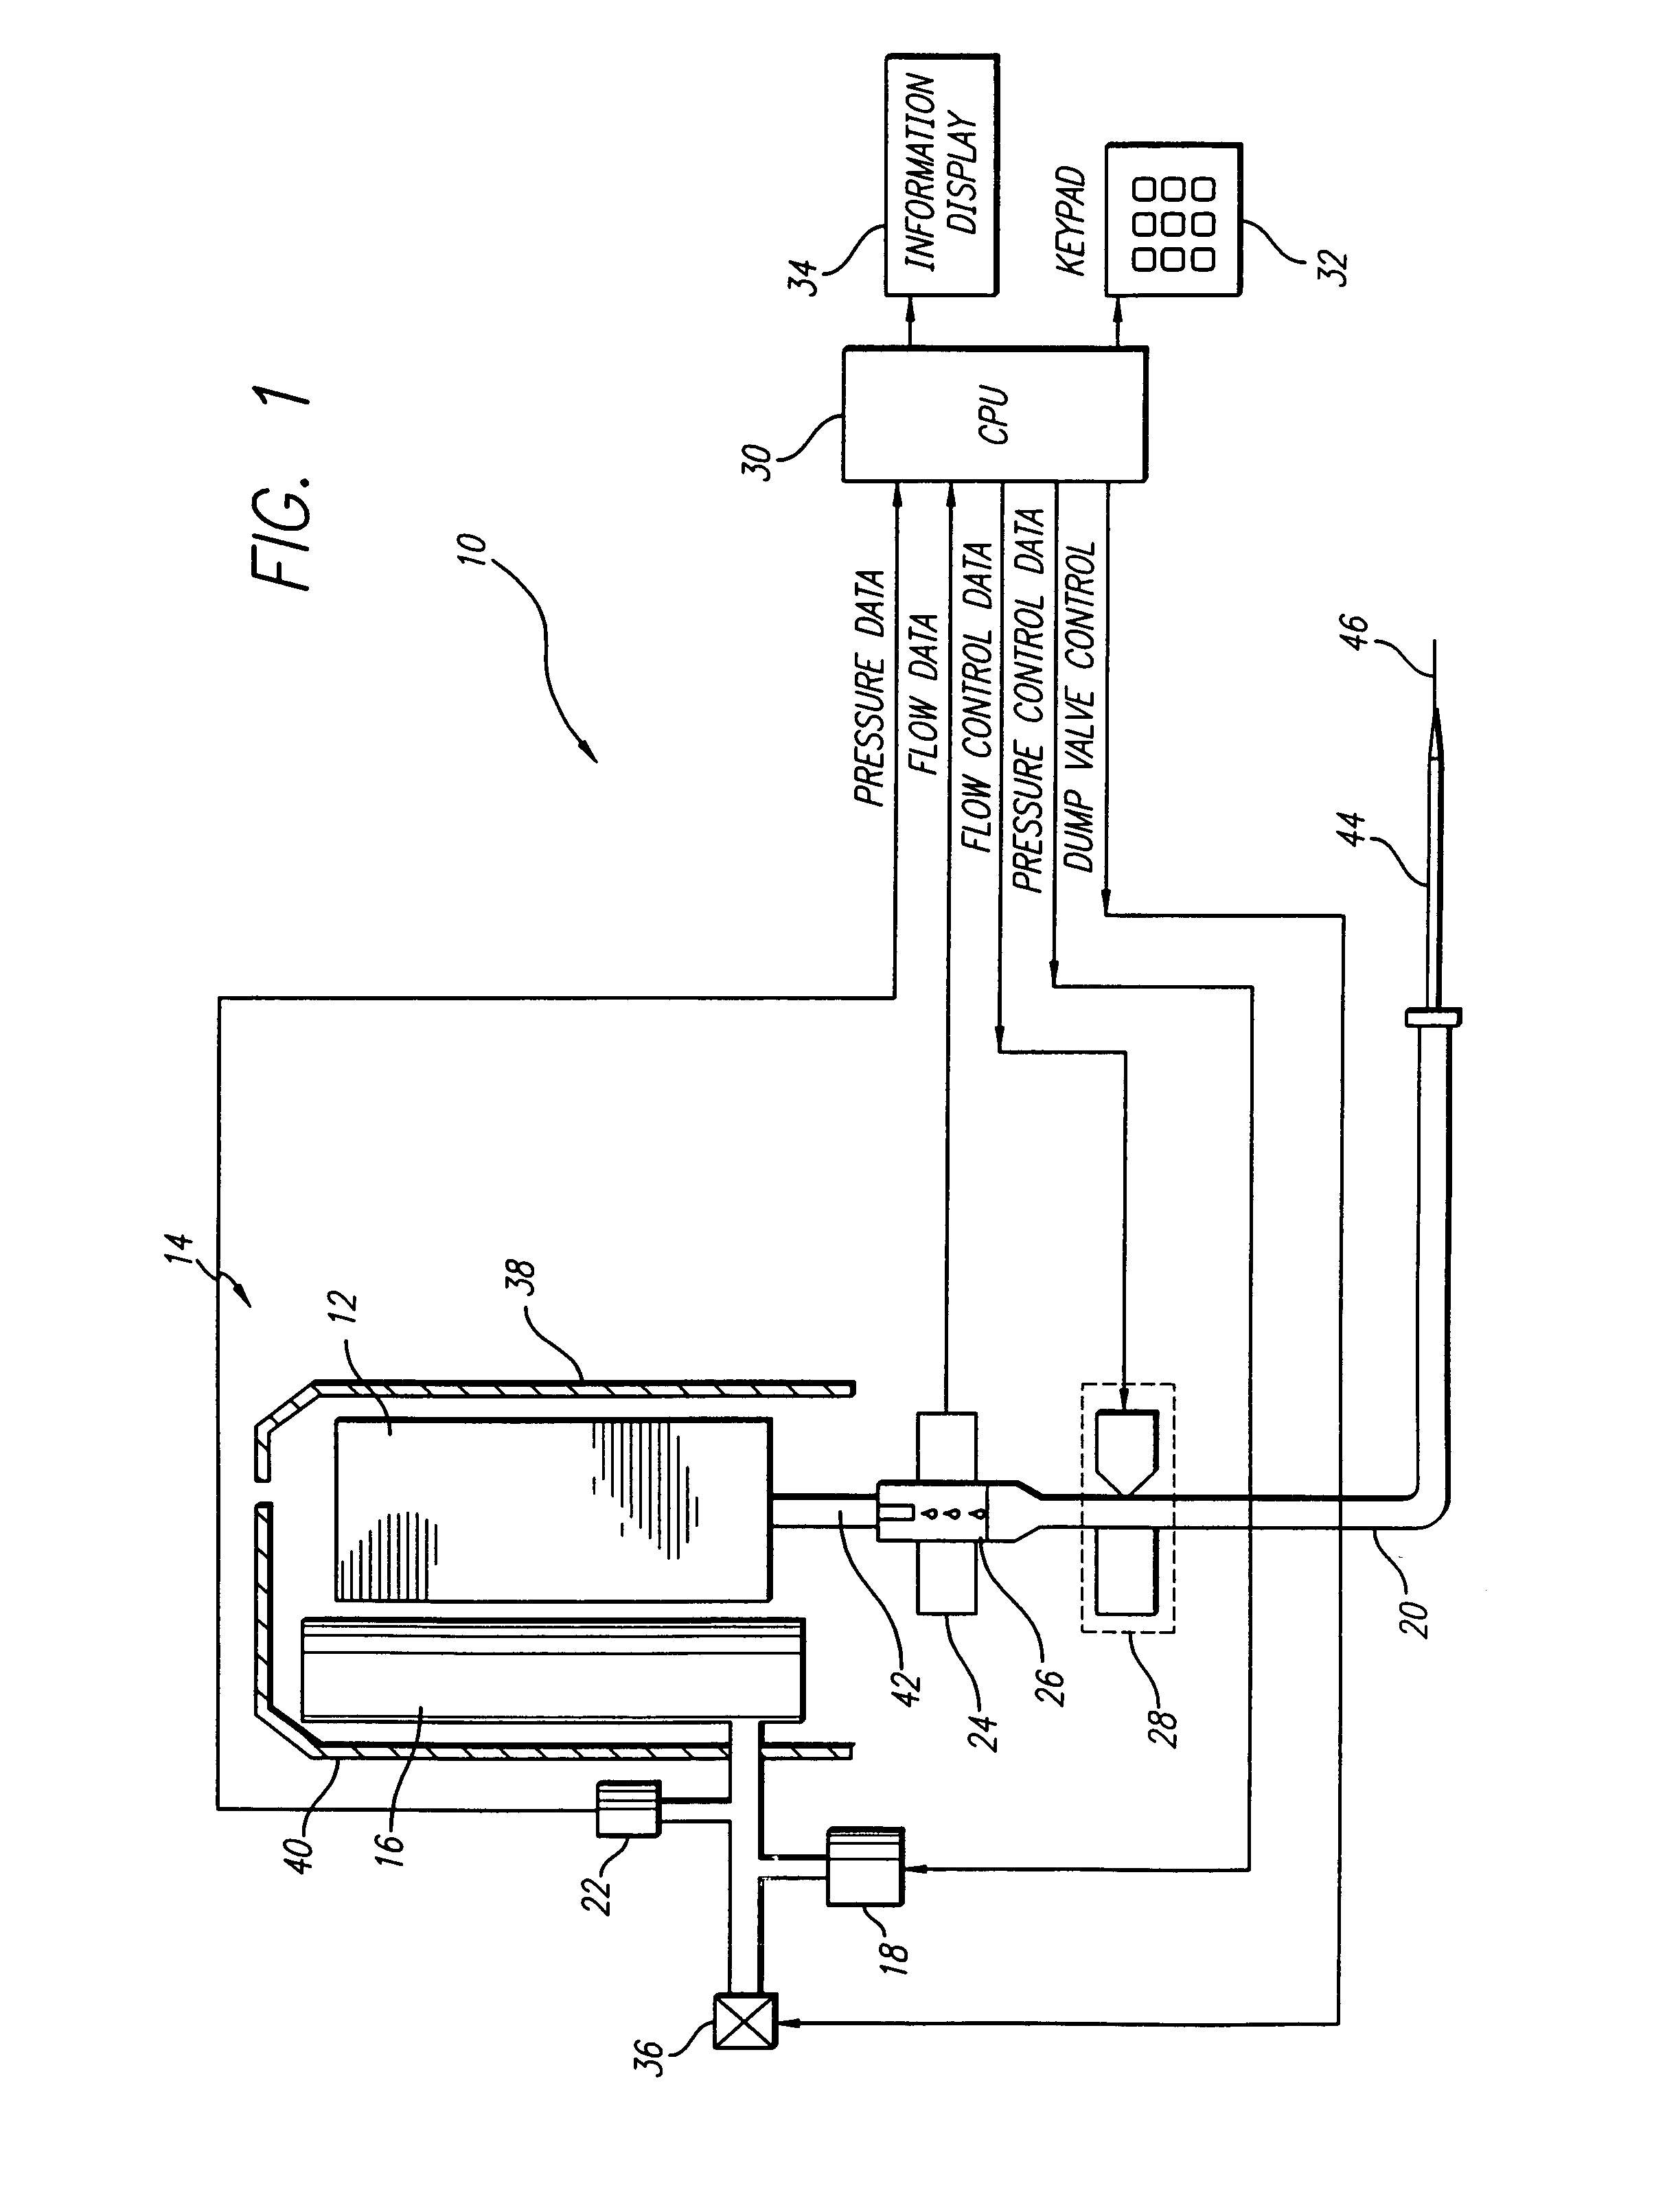 Positive pressure infusion system having downstream resistance measurement capability